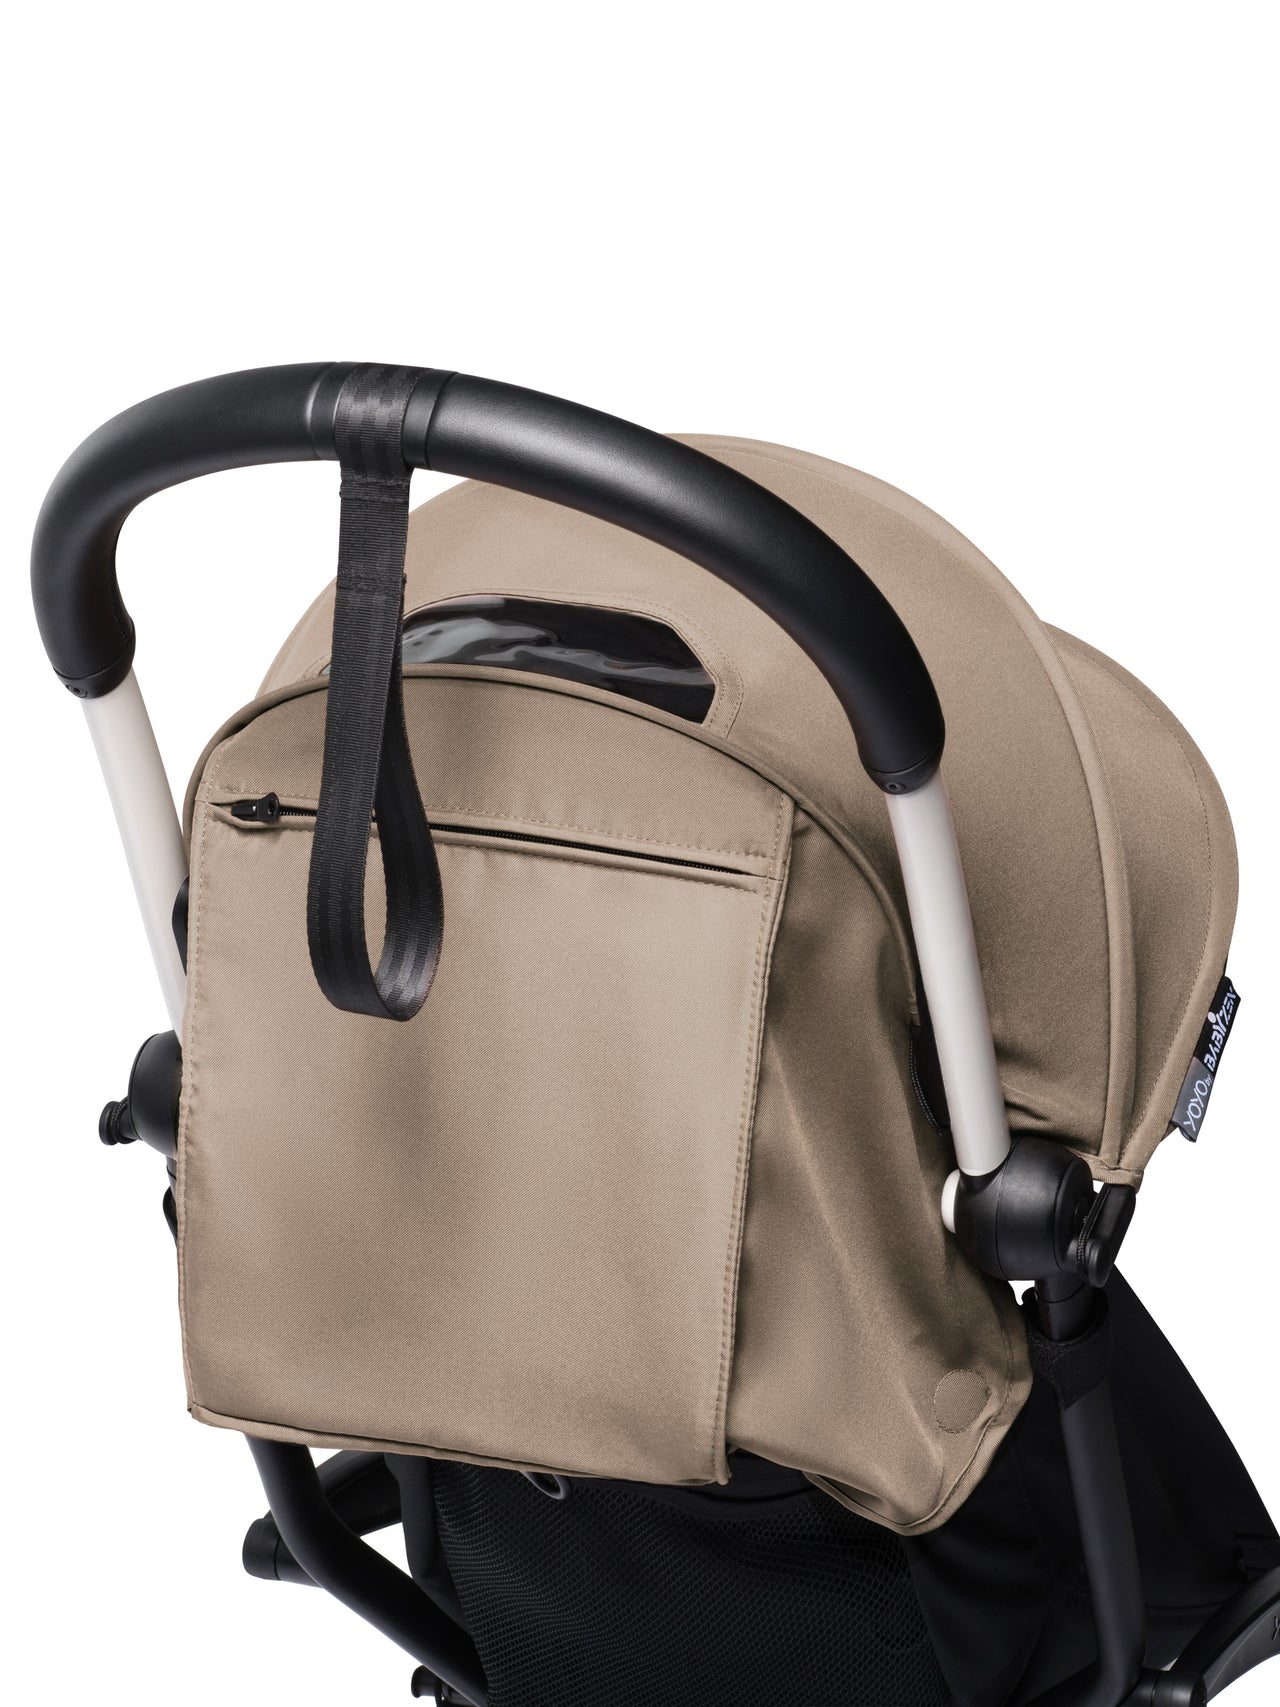 BABYZEN YOYO² 6+ Stroller (White Frame)- Taupe with FREE BACKPACK!